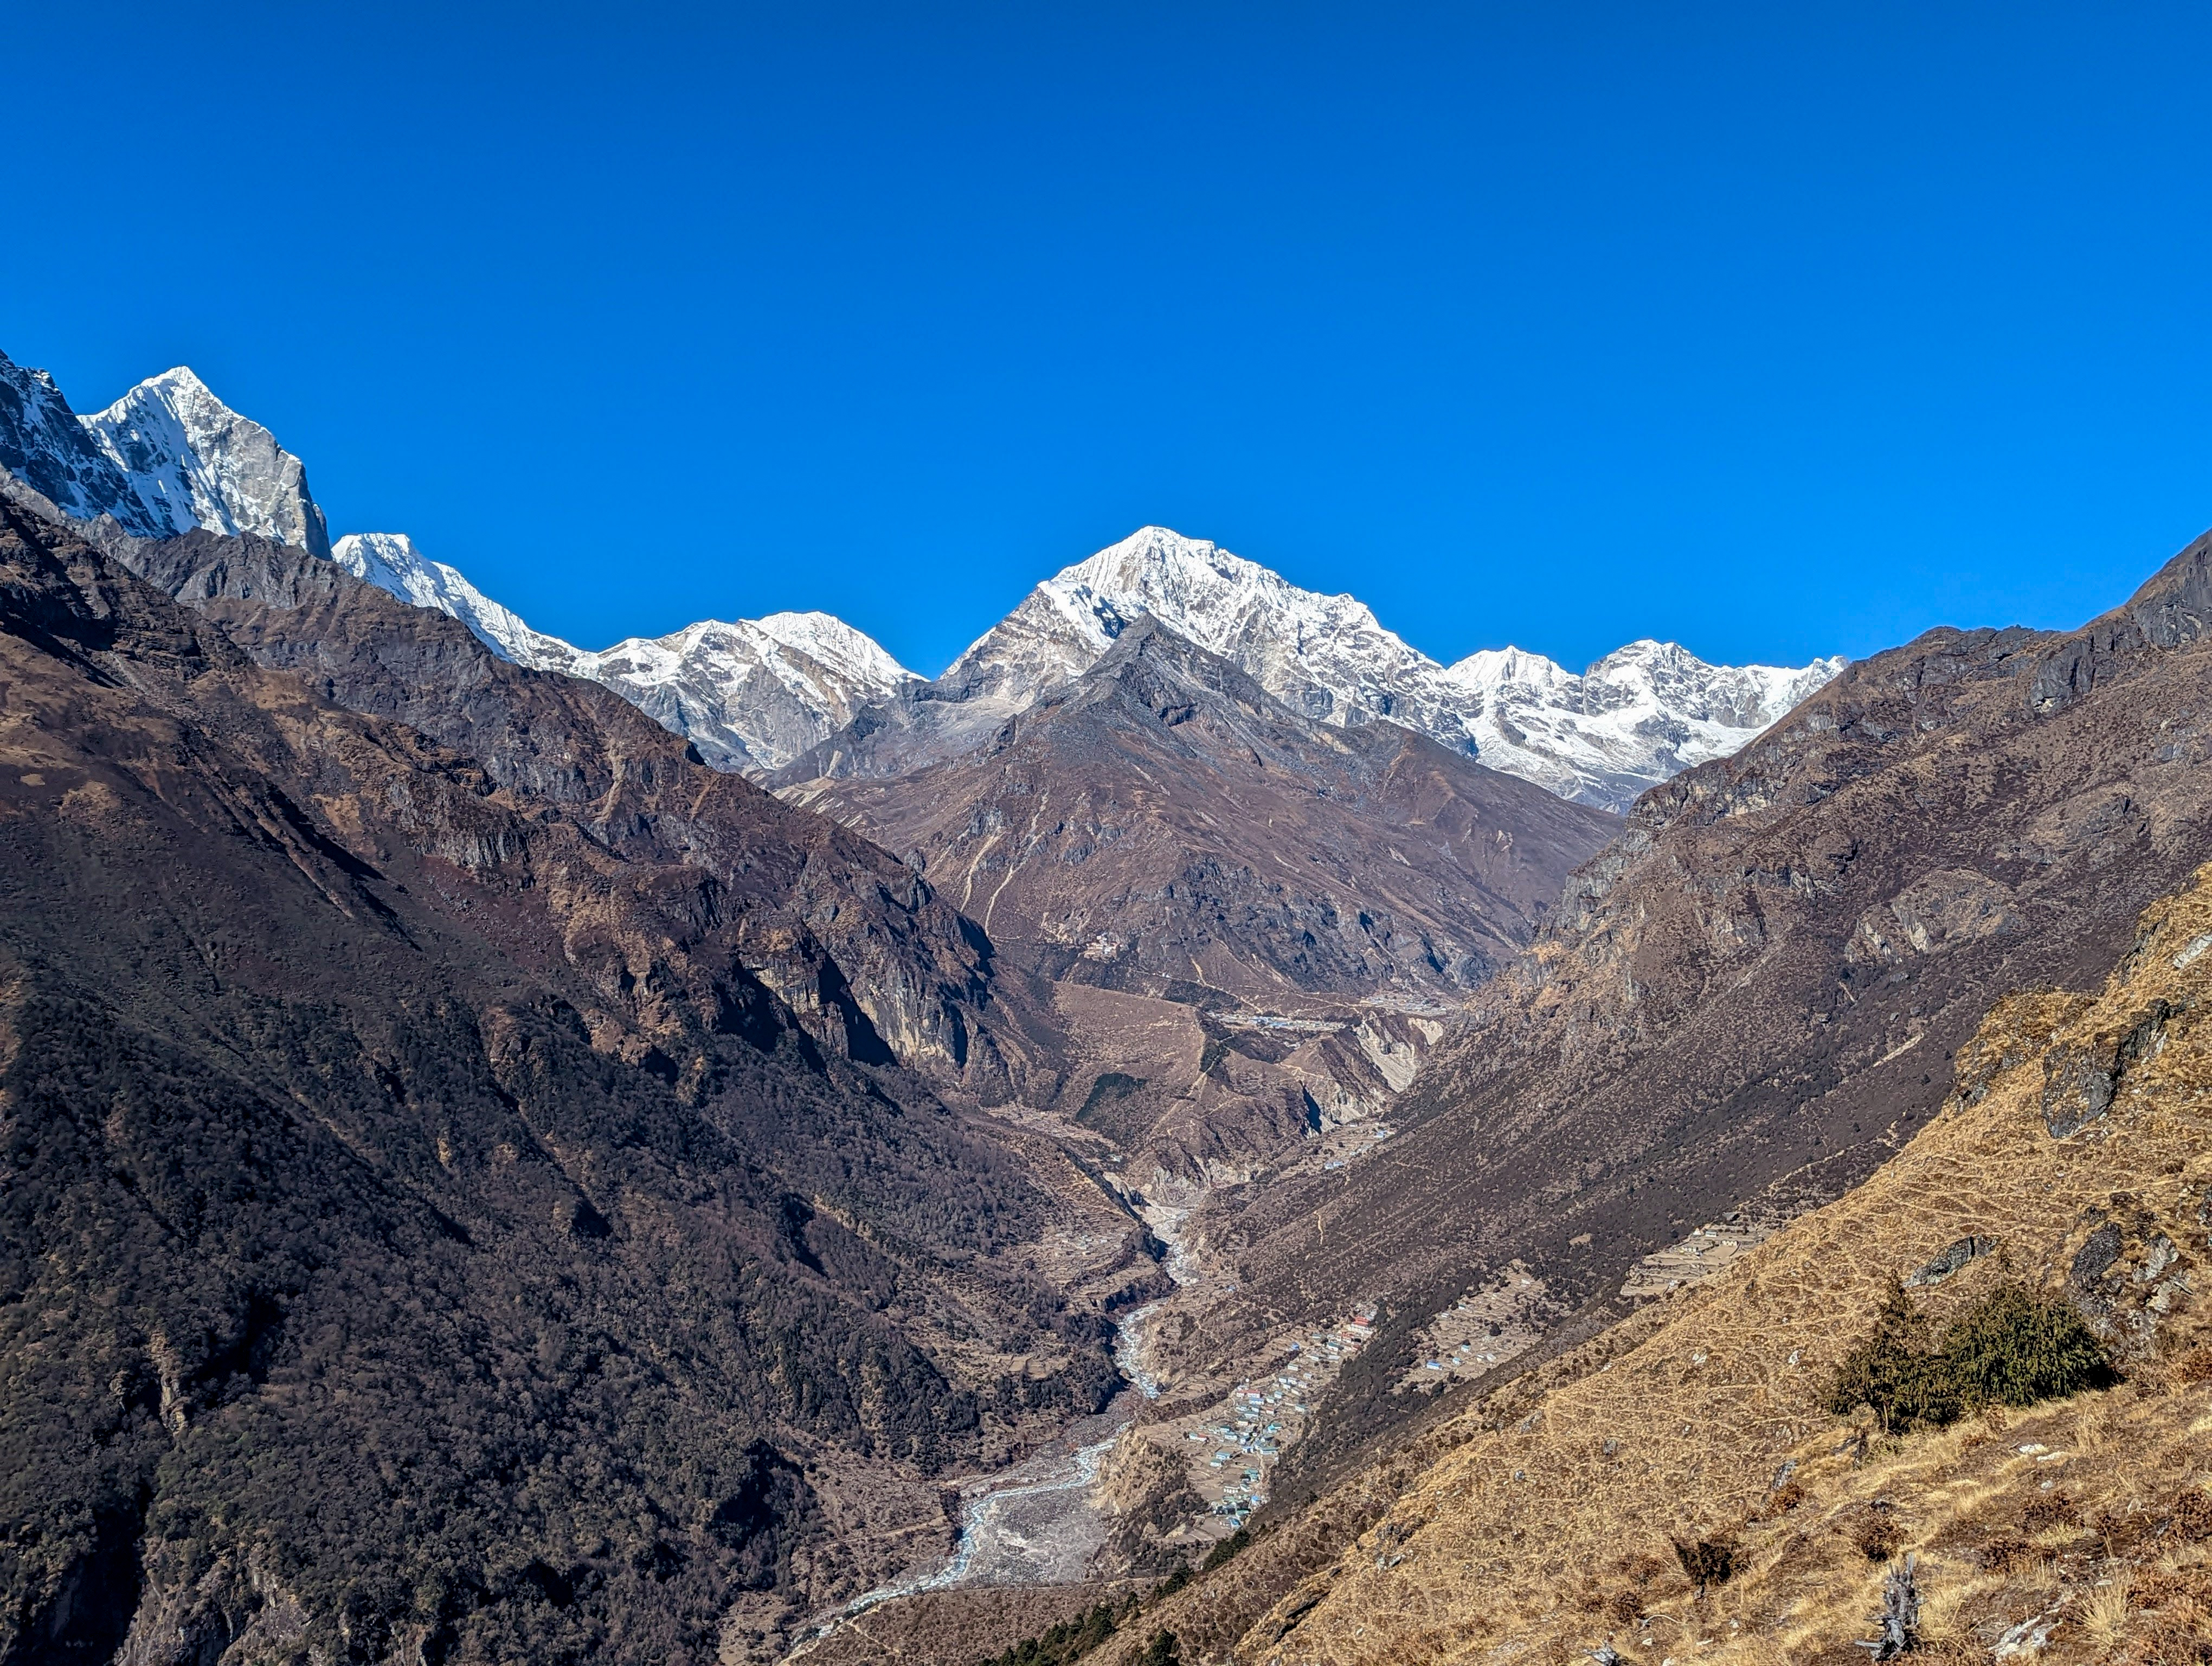 Day excursion to the Syangboche(3880m) and Khumjung valley'